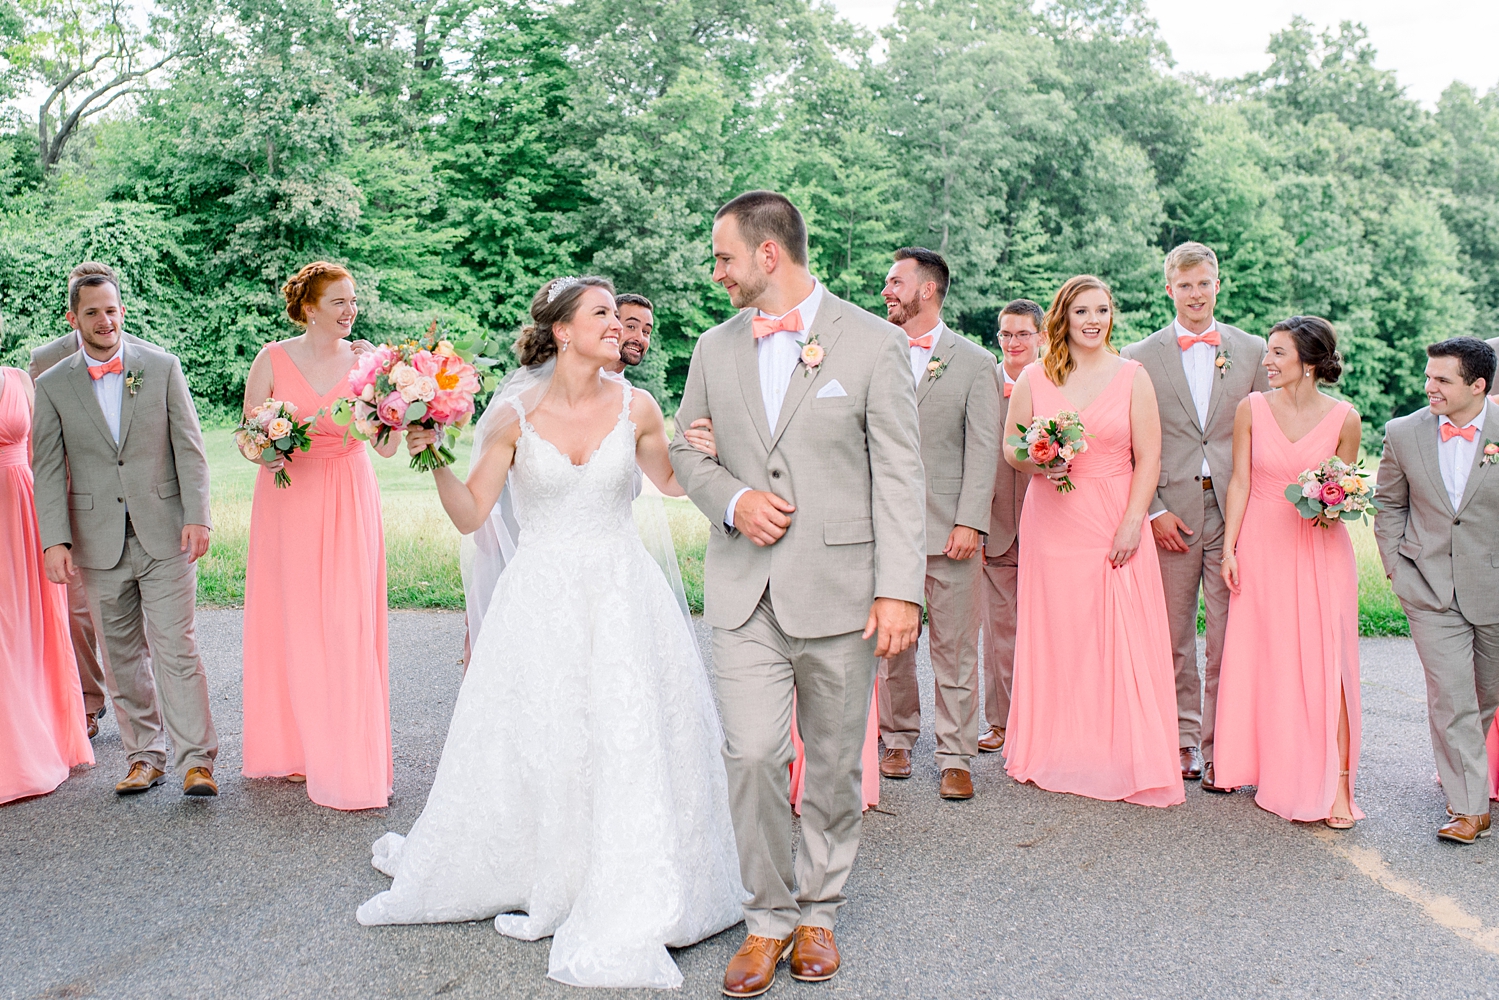 Romantic Garden Themed, Peach and Coral Summertime Wedding by Erika Christine Photography. Pink peony bridal bouquet